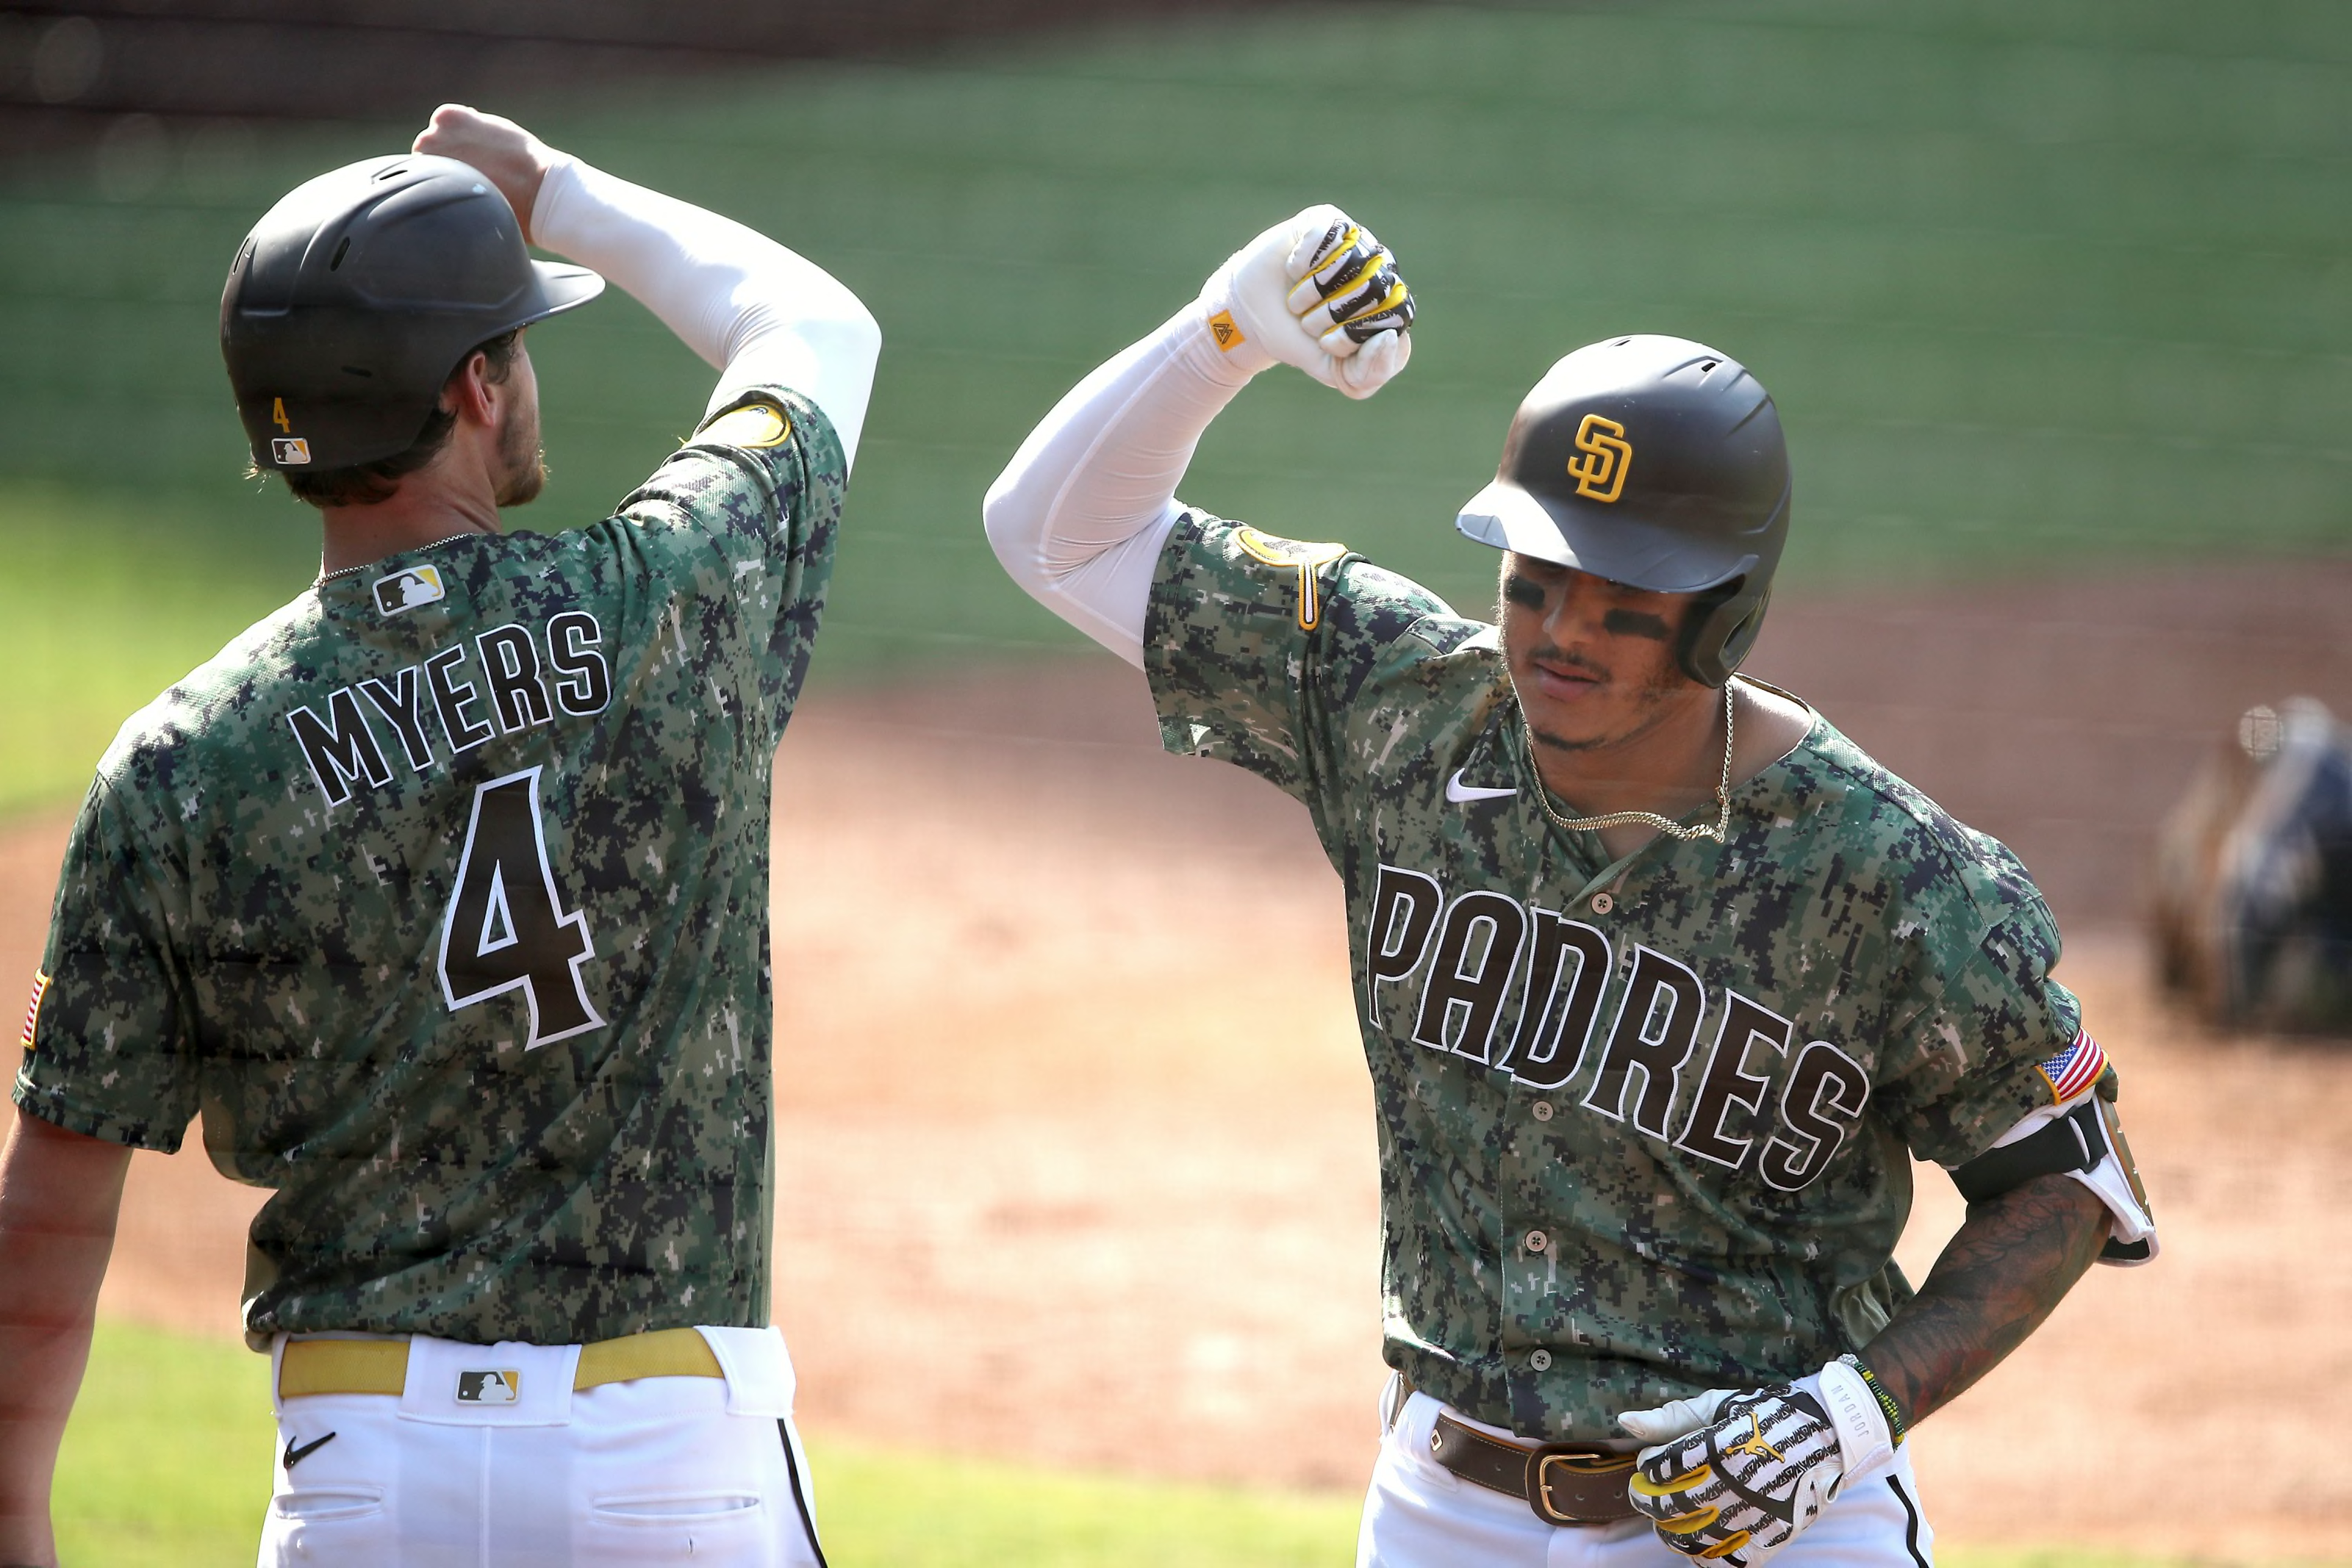 Are camo uniforms the worst uniforms in MLB history? r/baseball